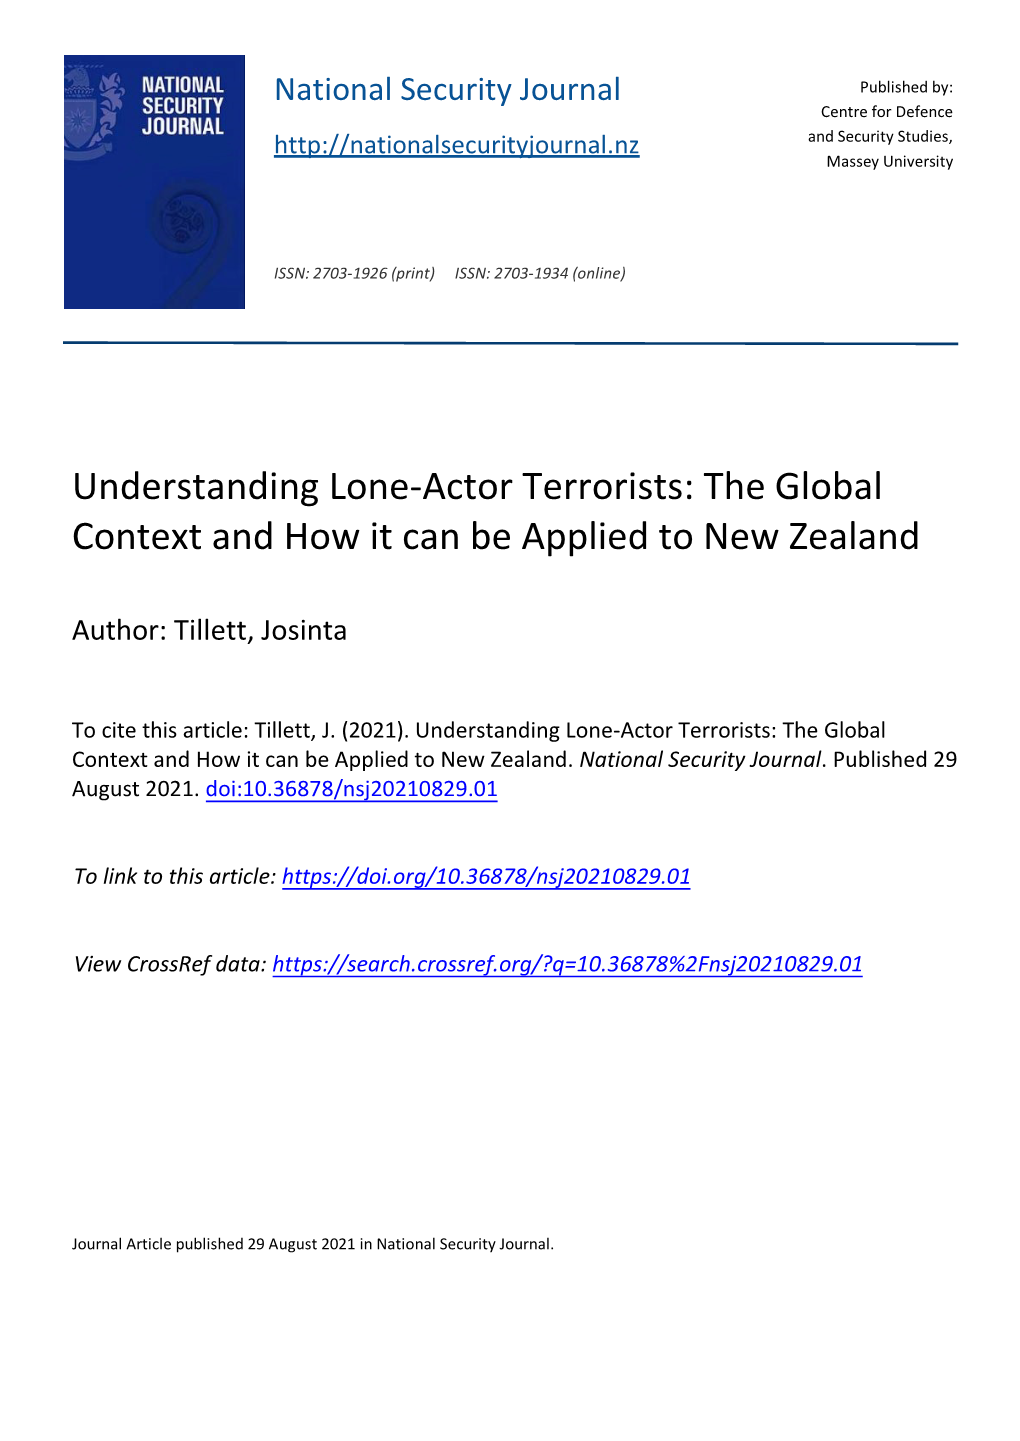 Understanding Lone-Actor Terrorists: the Global Context and How It Can Be Applied to New Zealand